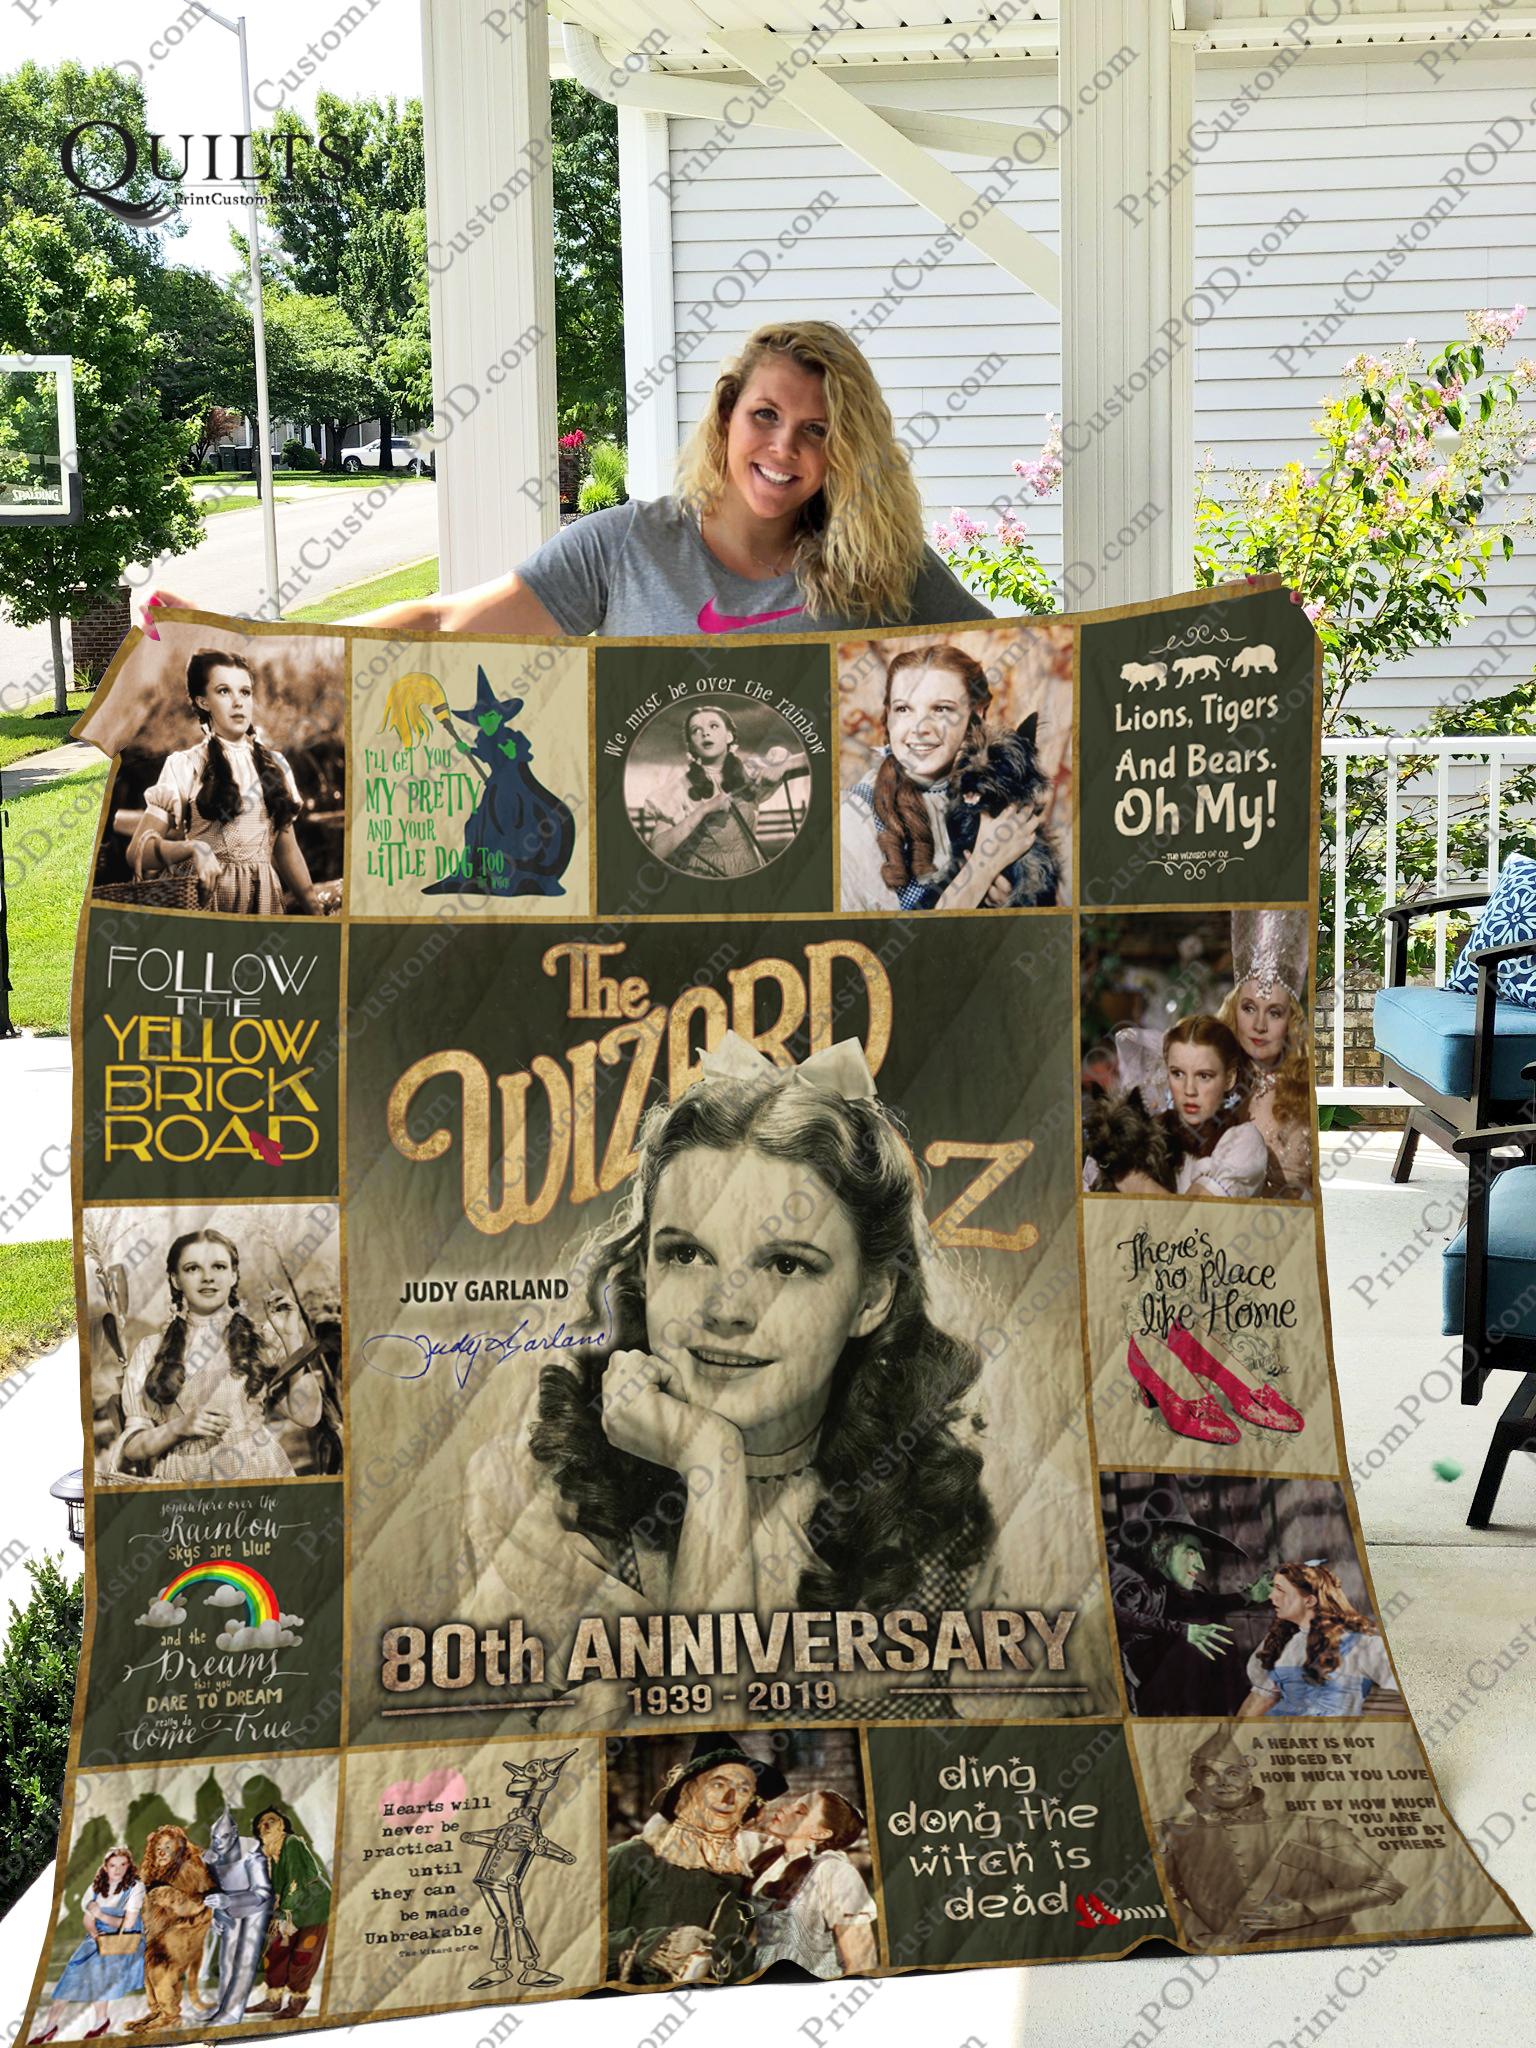 The wizard of oz judy garland 80th anniversary quilt - twin